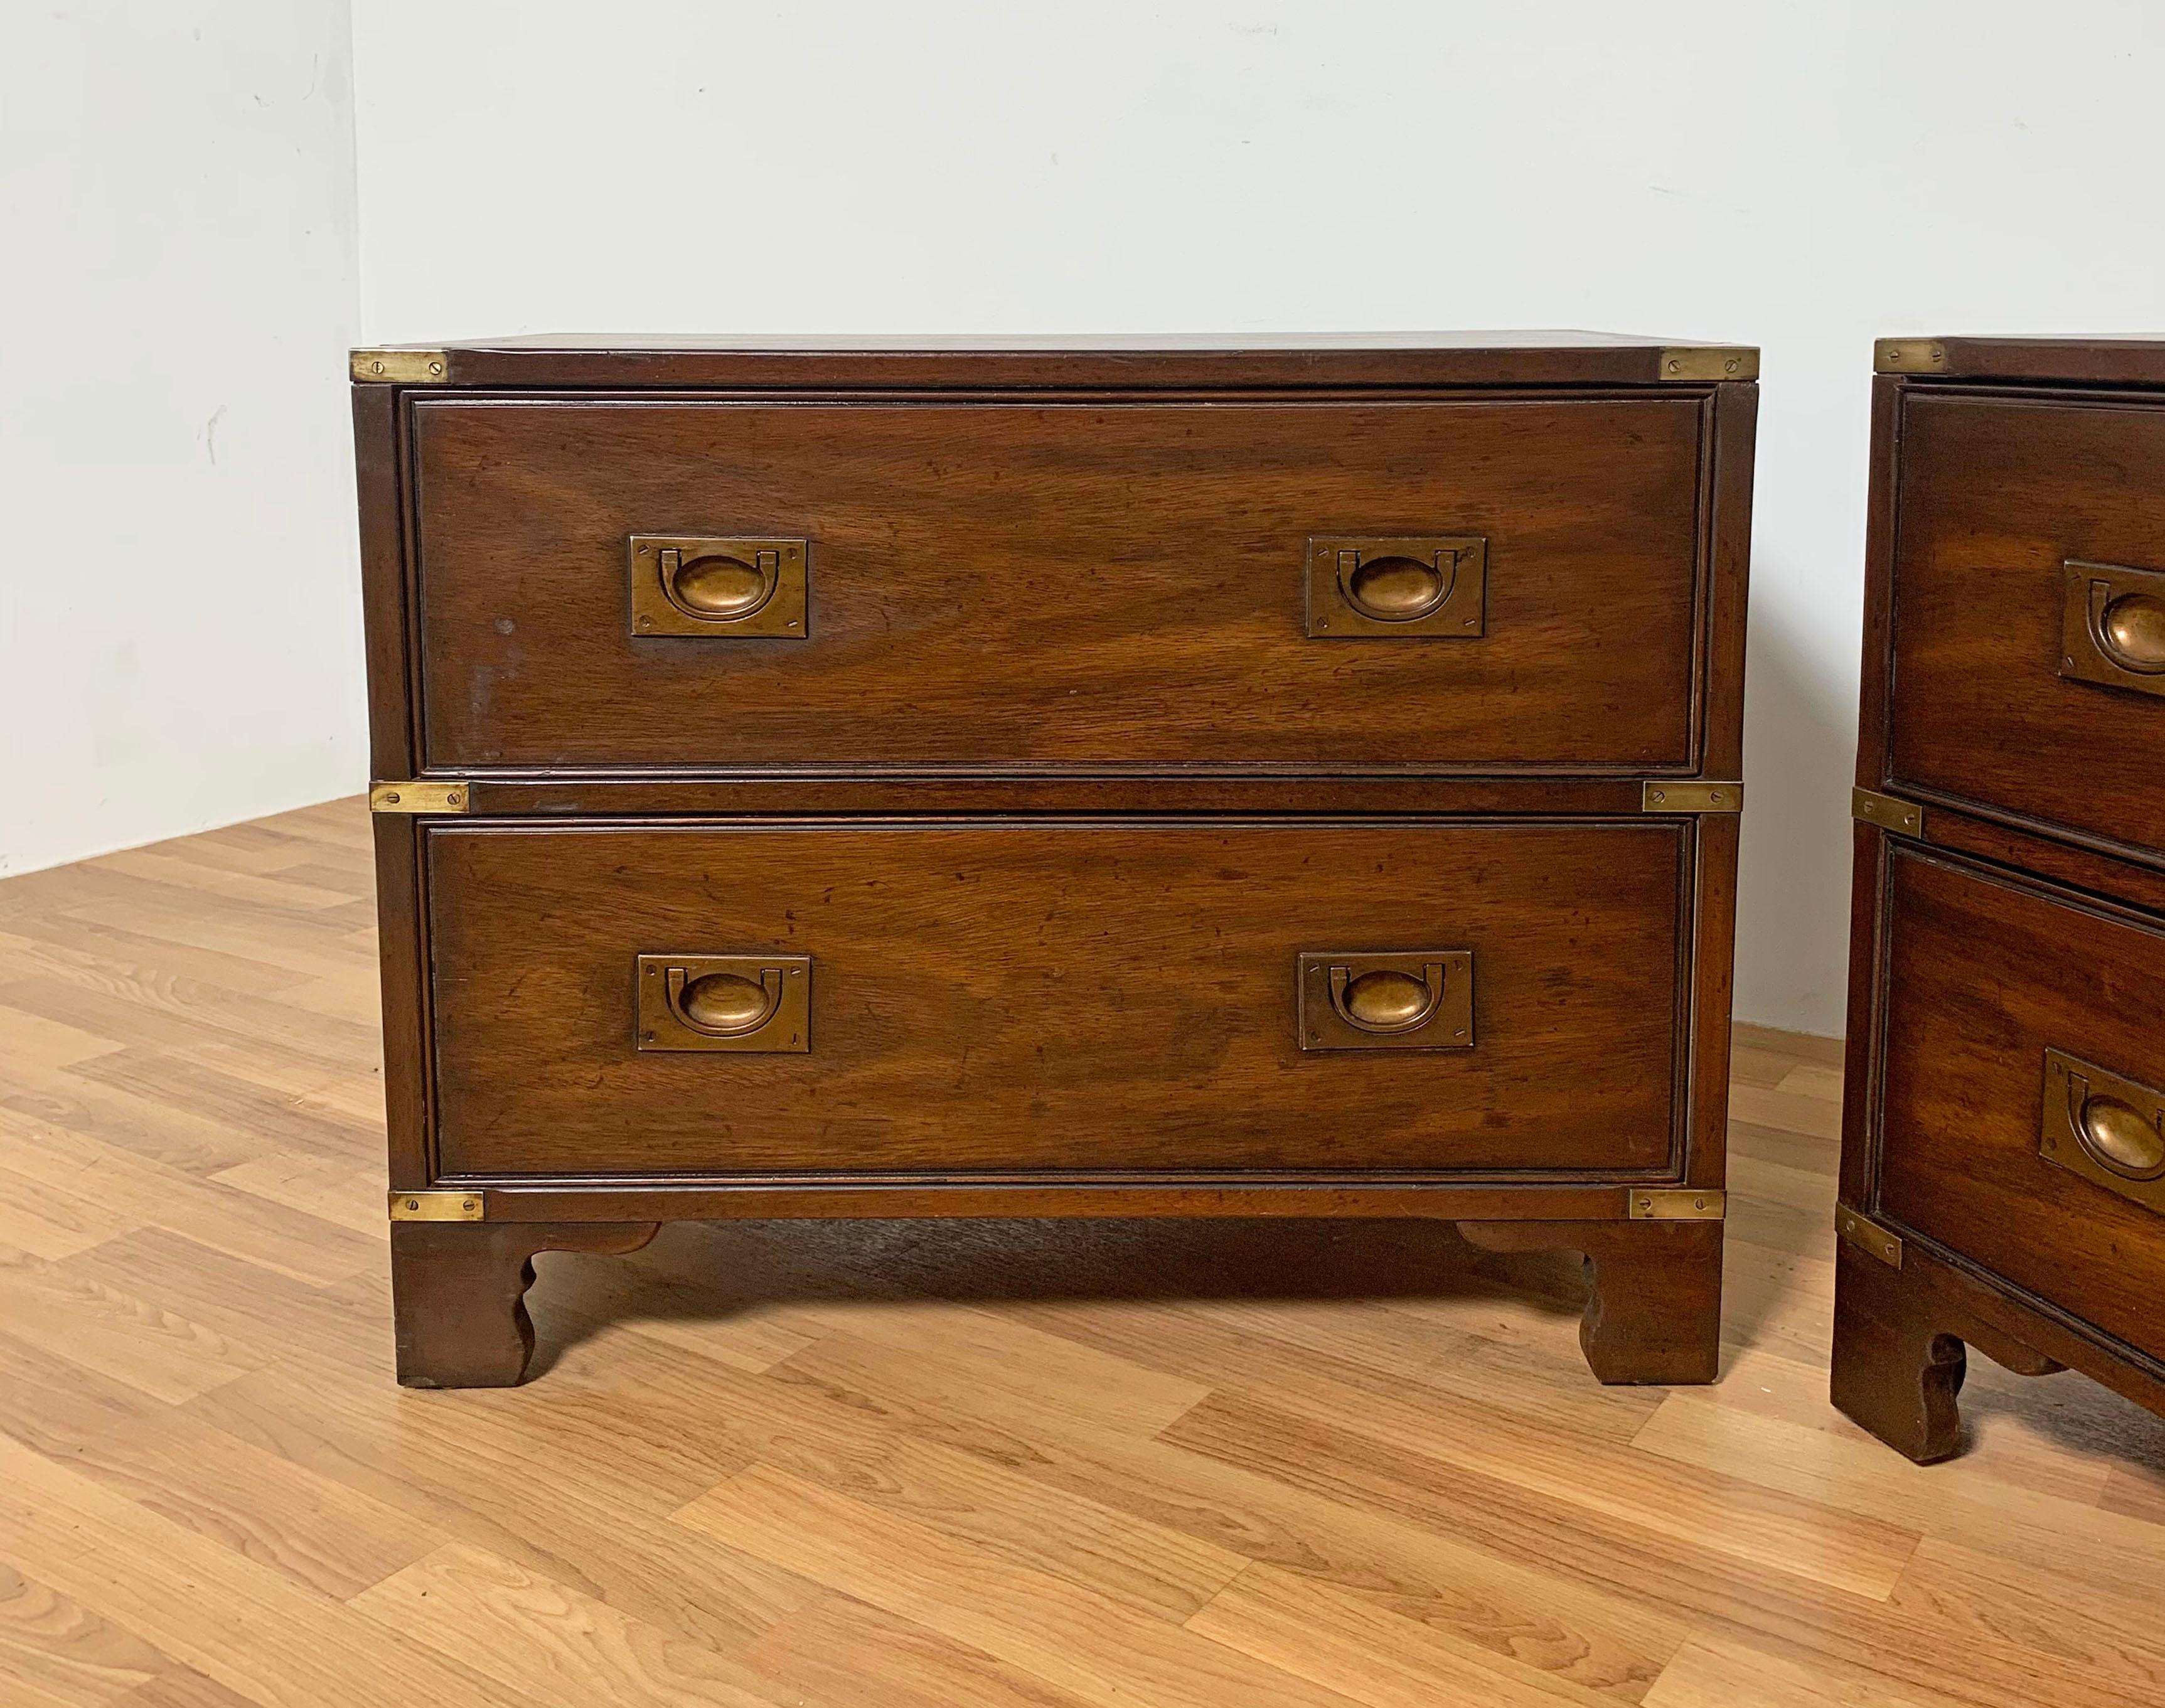 A pair of campaign style nightstands in walnut with brass hardware accents by Heritage Henredon, ca. 1960s.